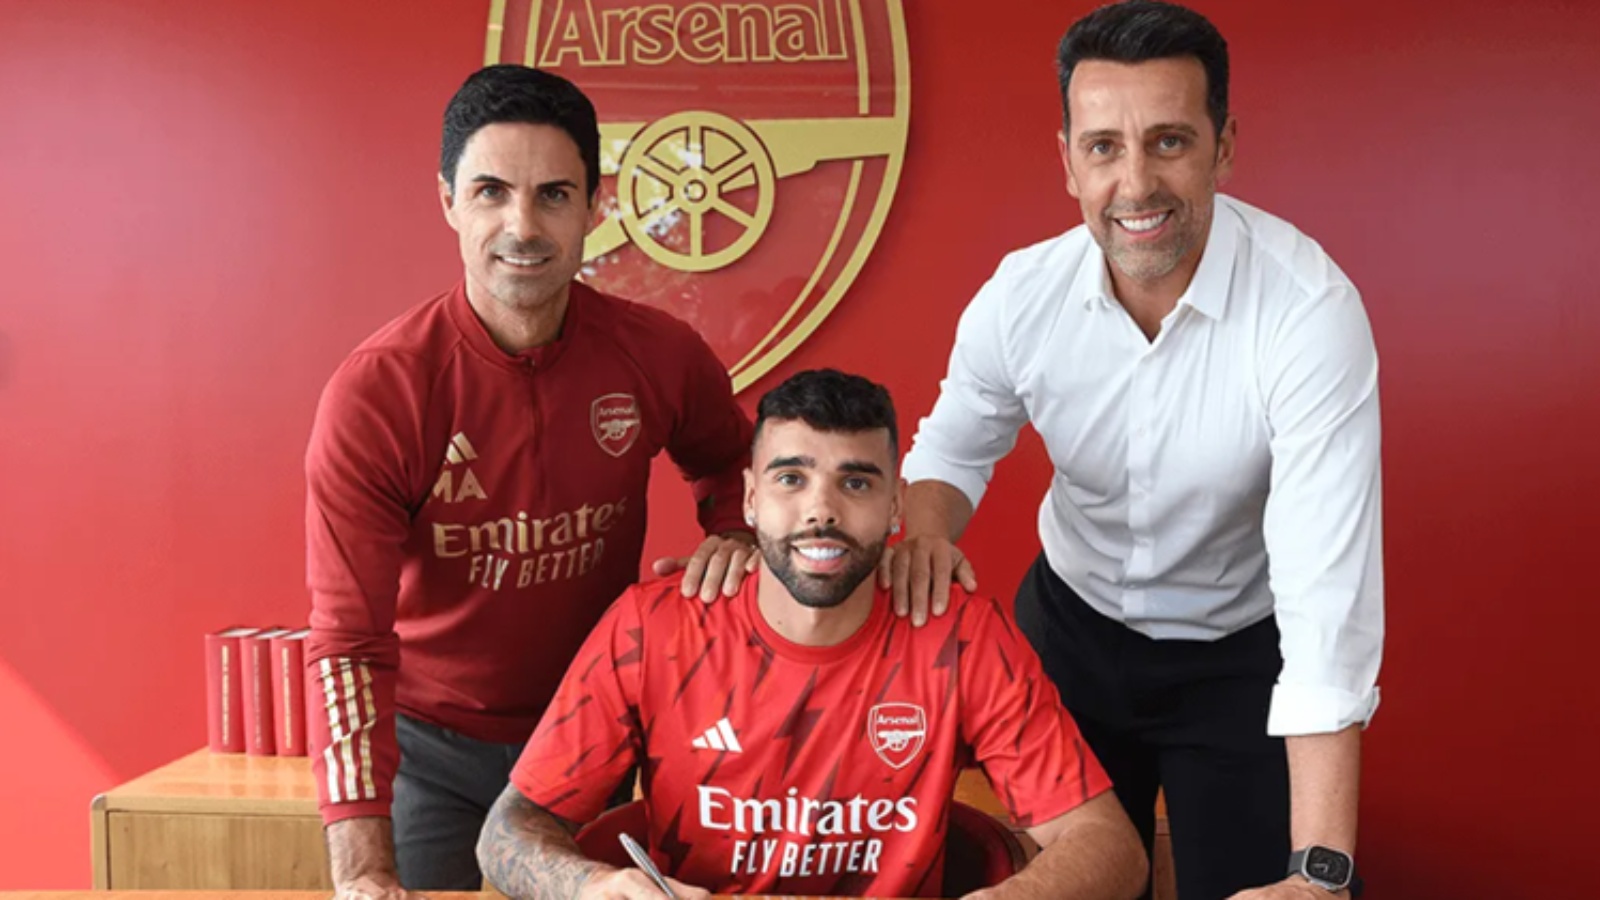 Just in: Arsenal signs new goalkeeper